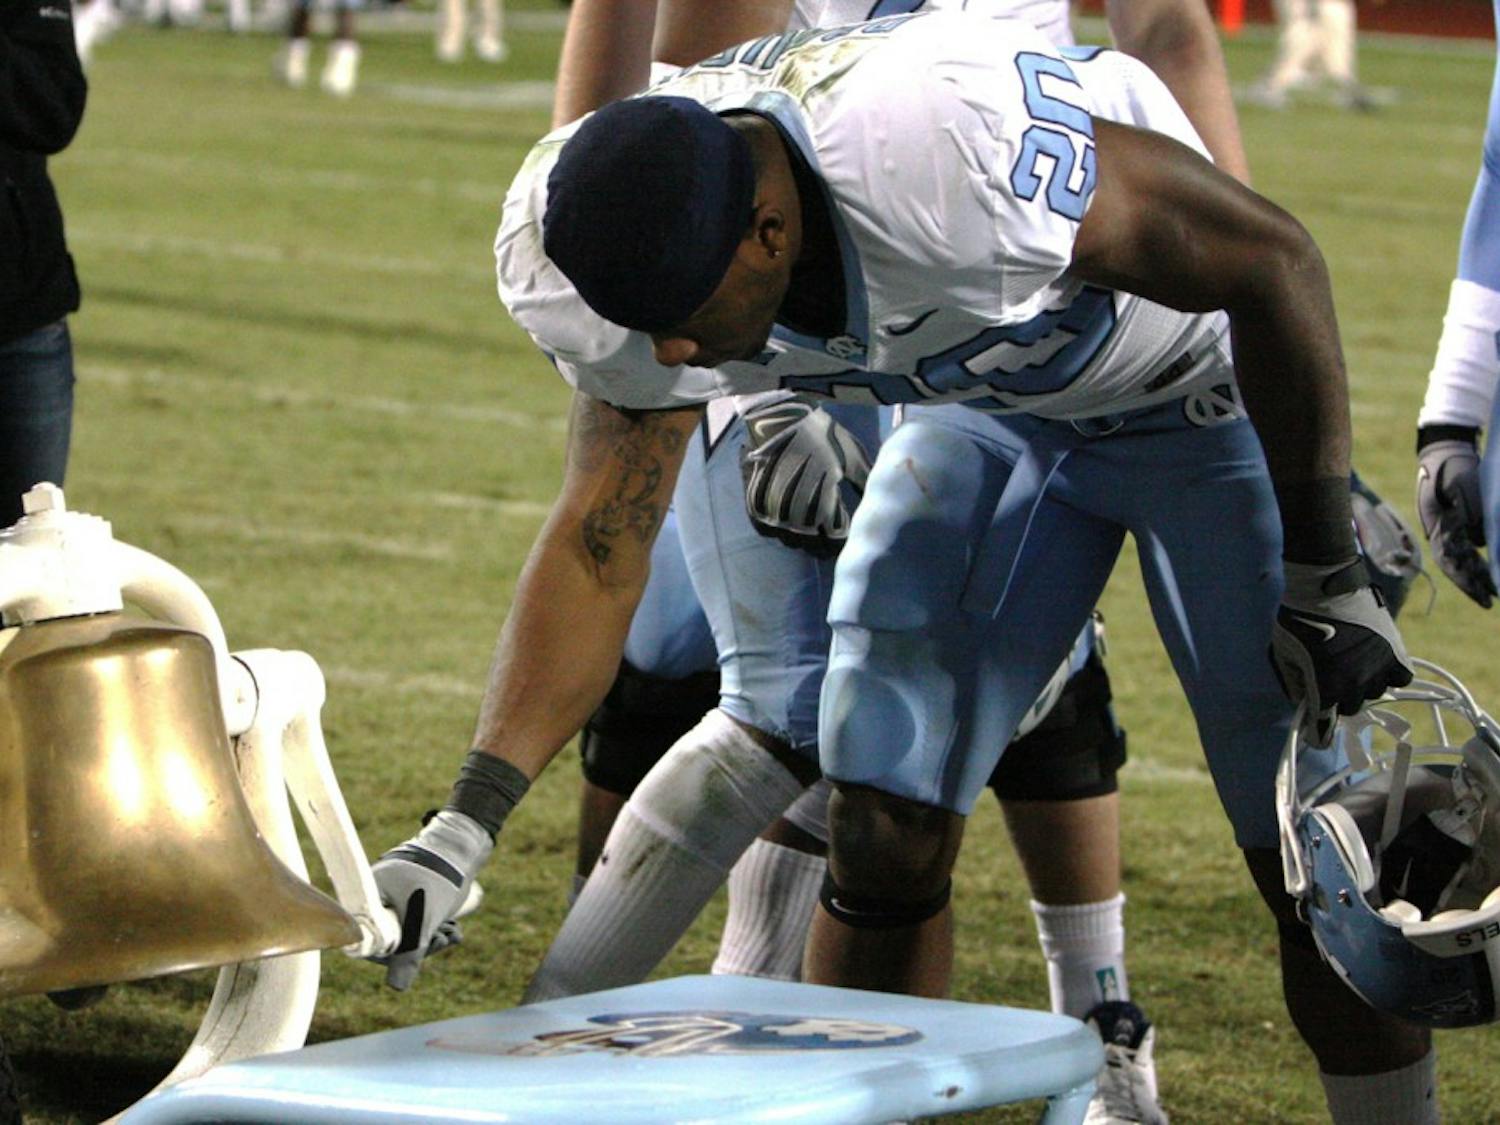 Senior tailback Shaun Draughn rings the Victory Bell following UNC’s 24-19 win against rival Duke. The senior class never suffered a loss to the Blue Devils in four years.